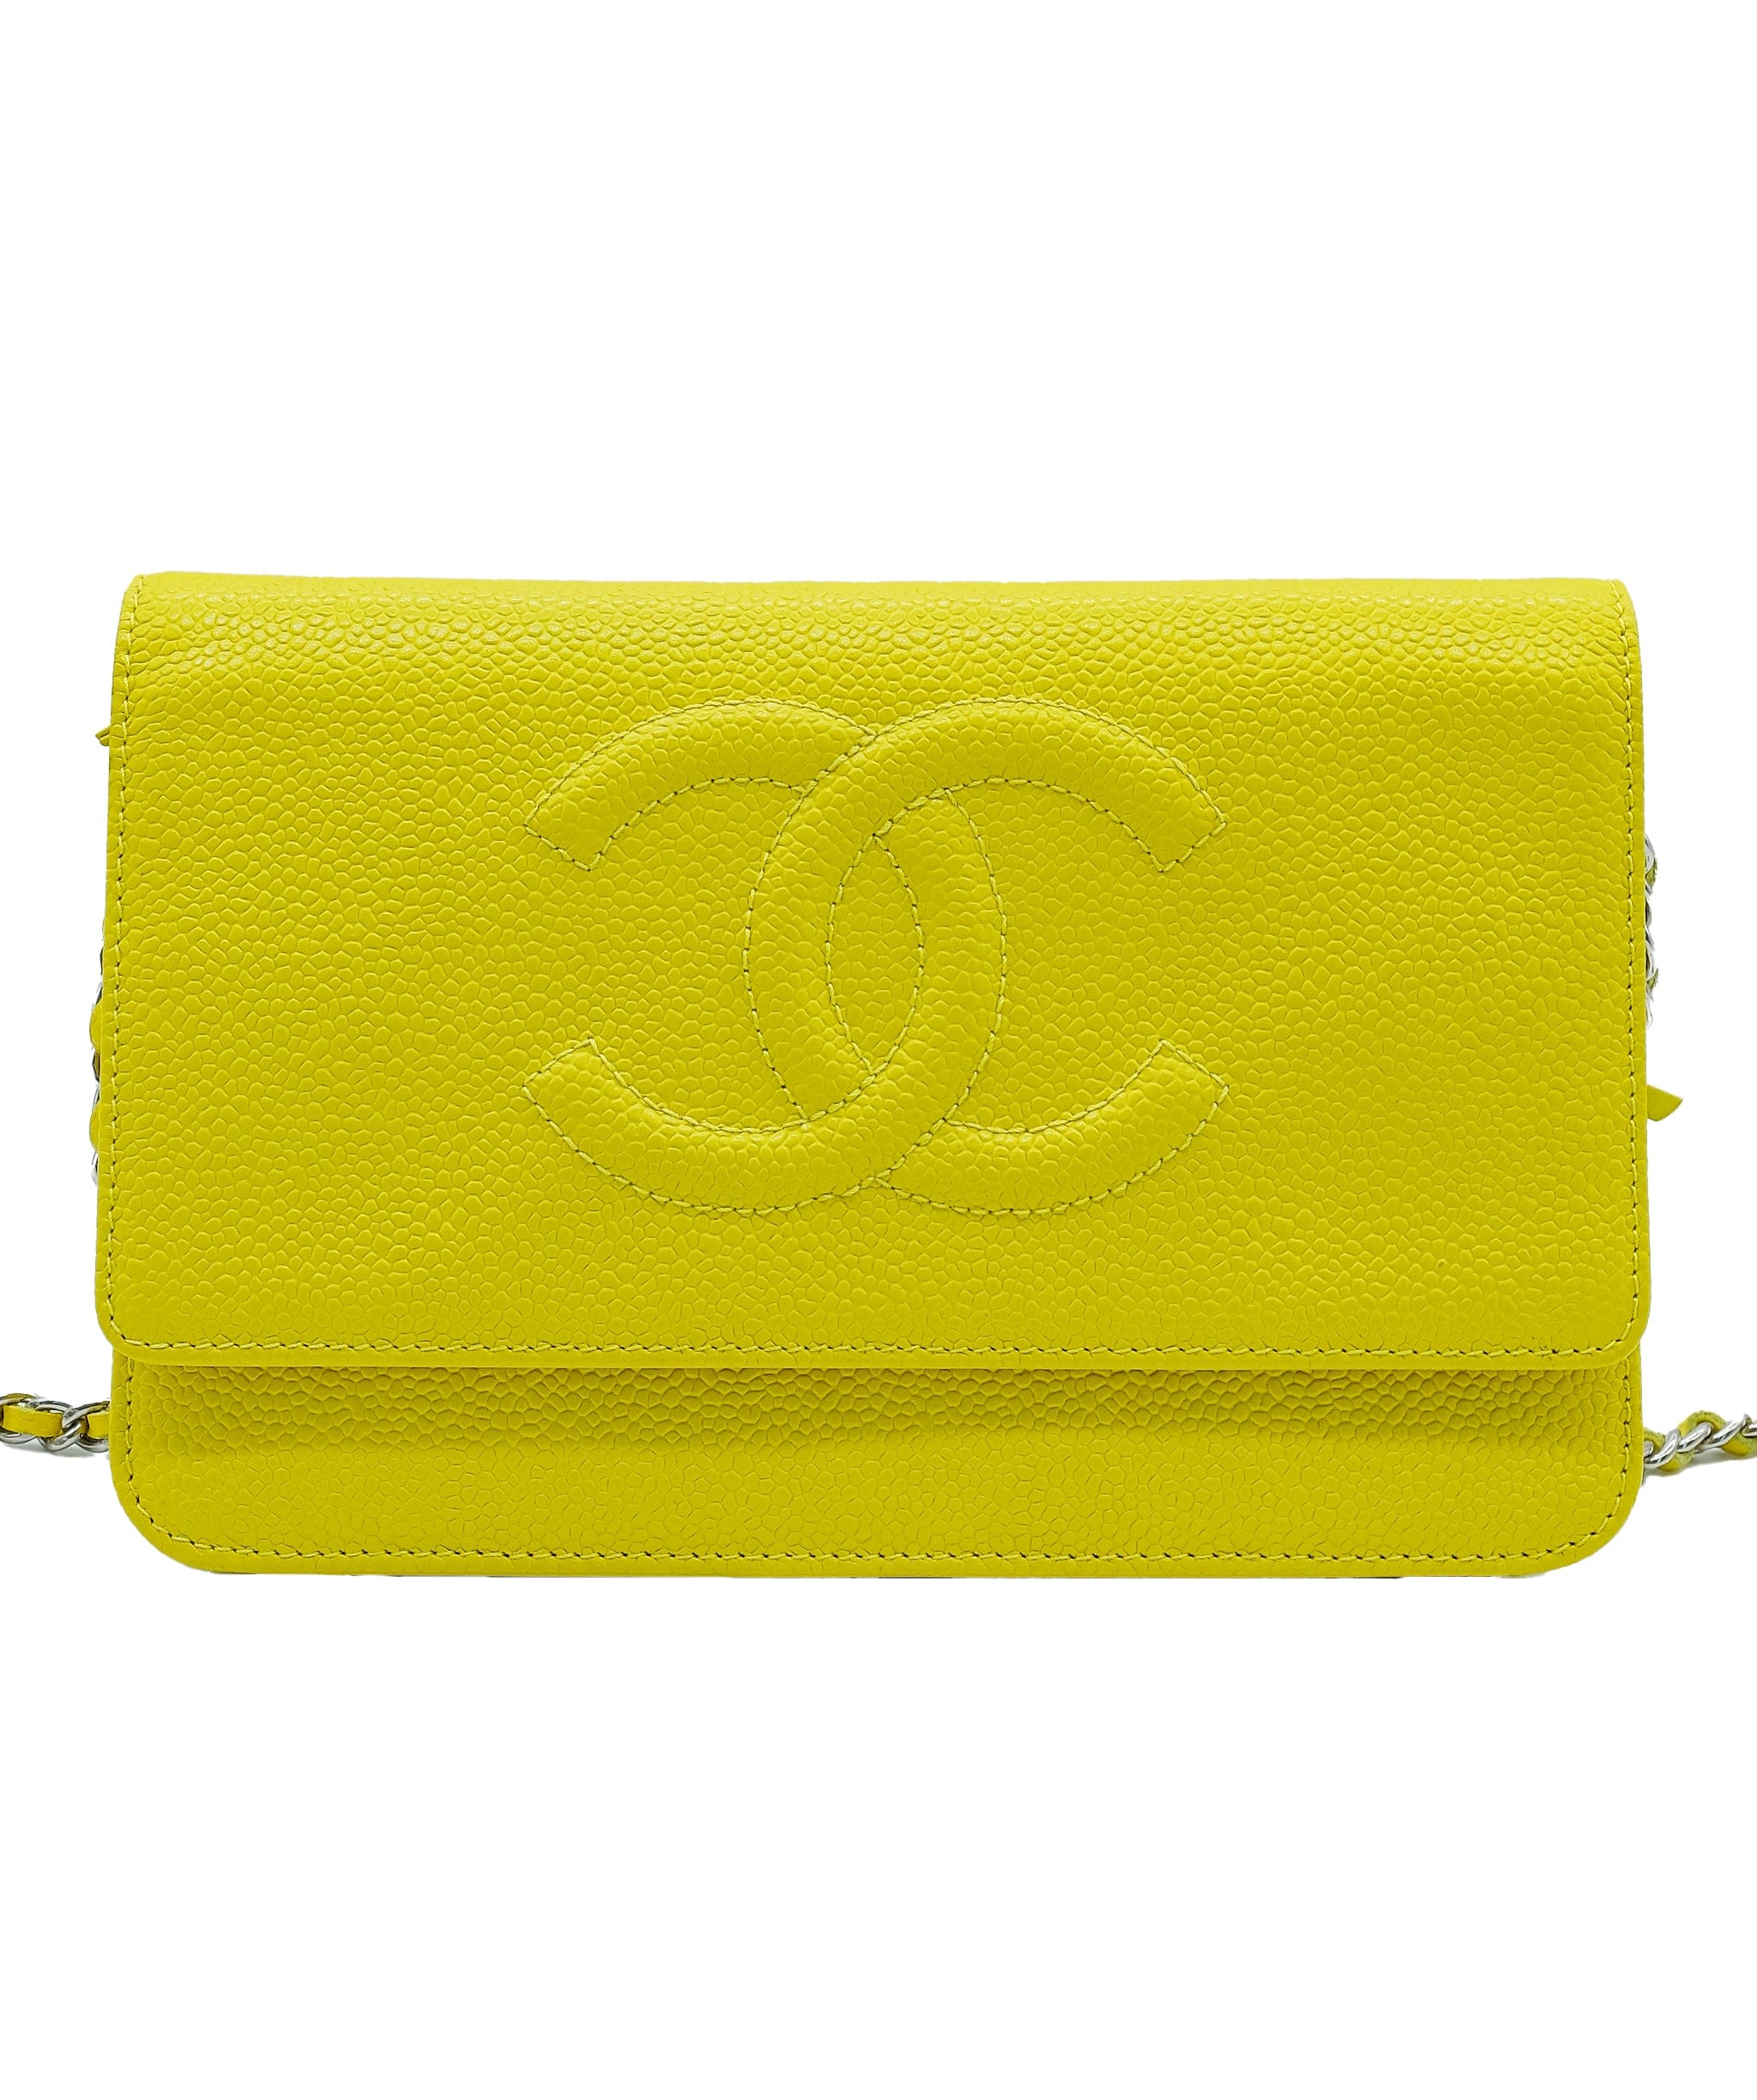 Chanel Chanel Chain Wallet Caviarskin Yellow Card And Seal S/N 19333810 ASL8147